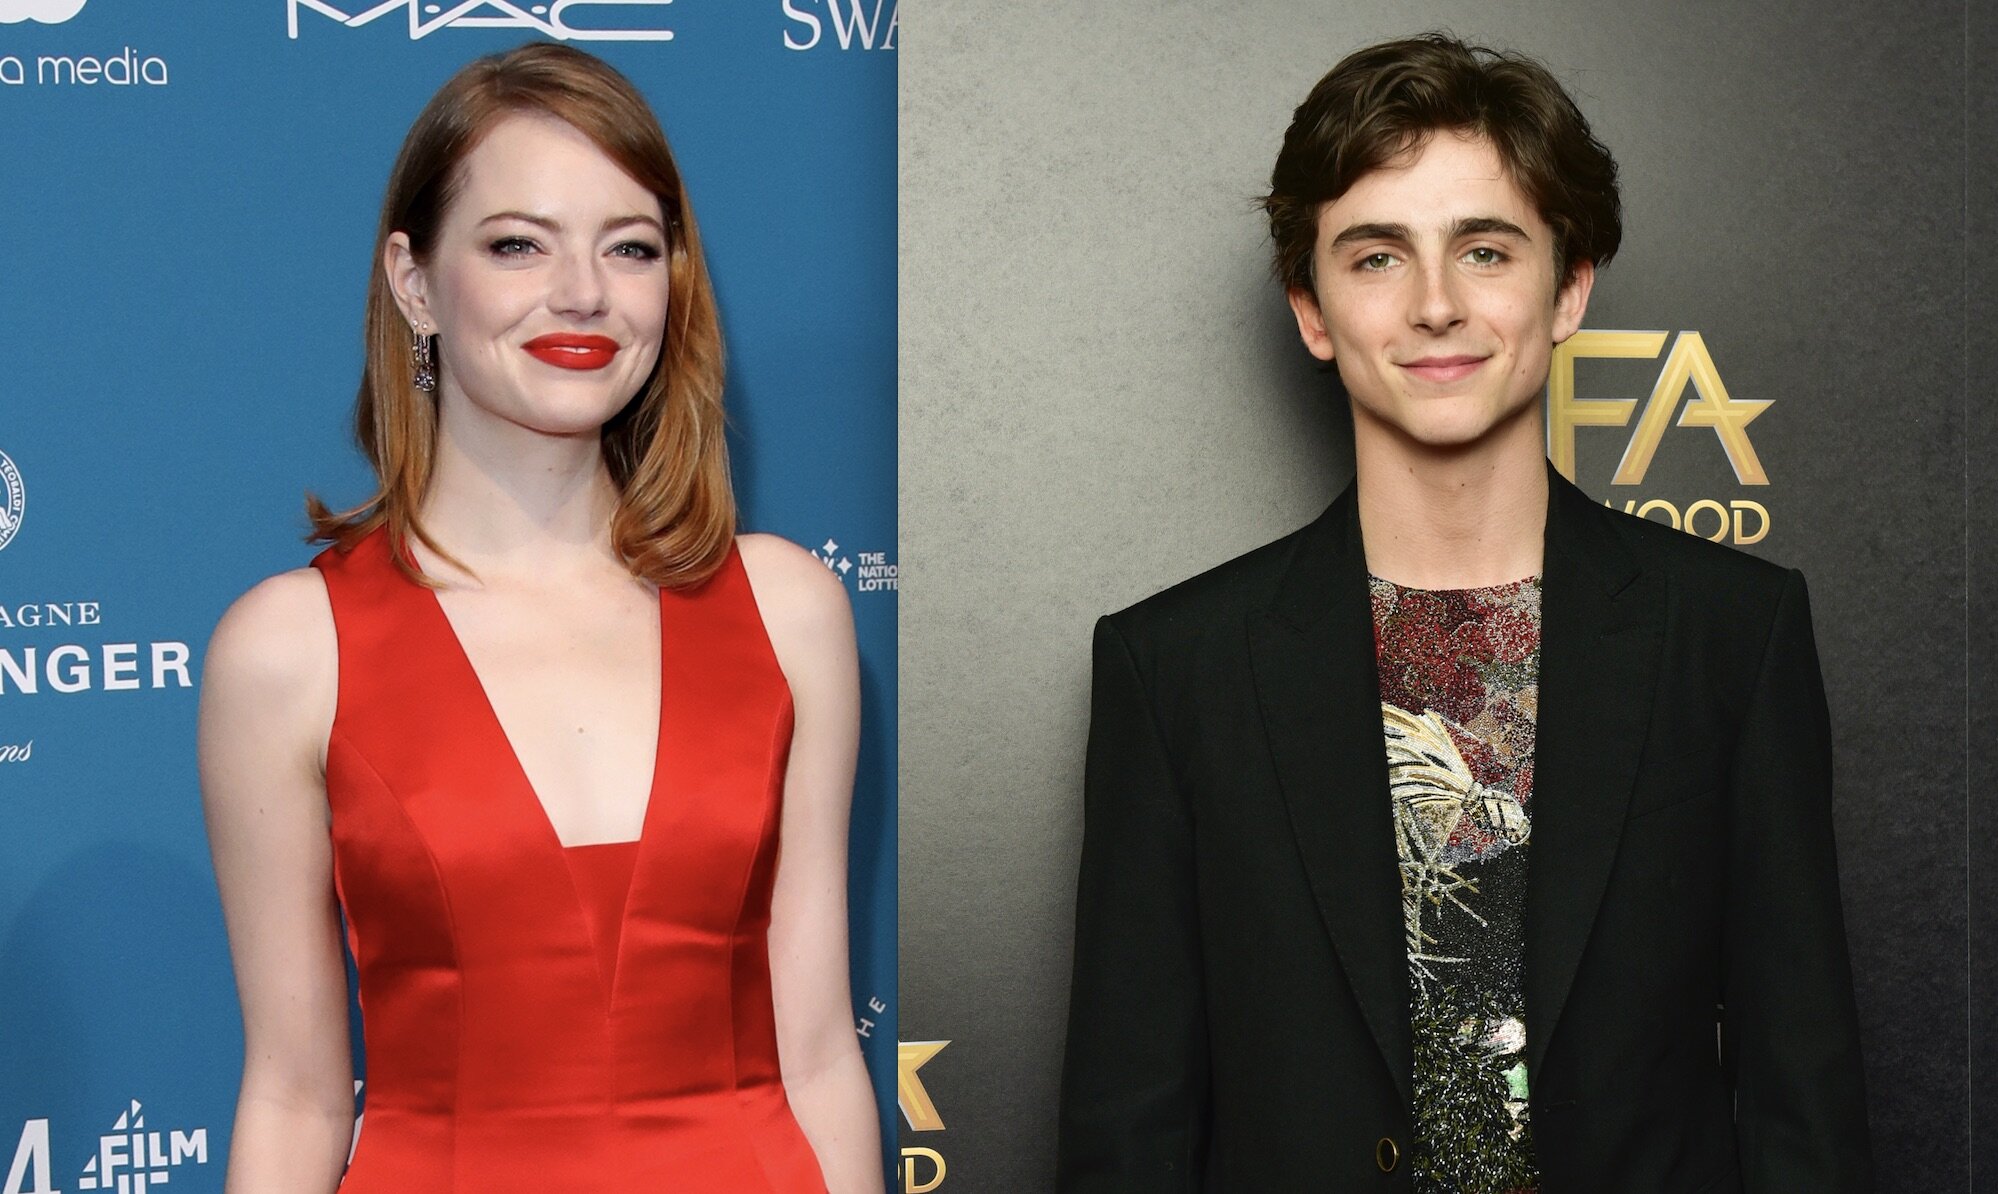 Dating stone is who 2018 emma Emma Stone's